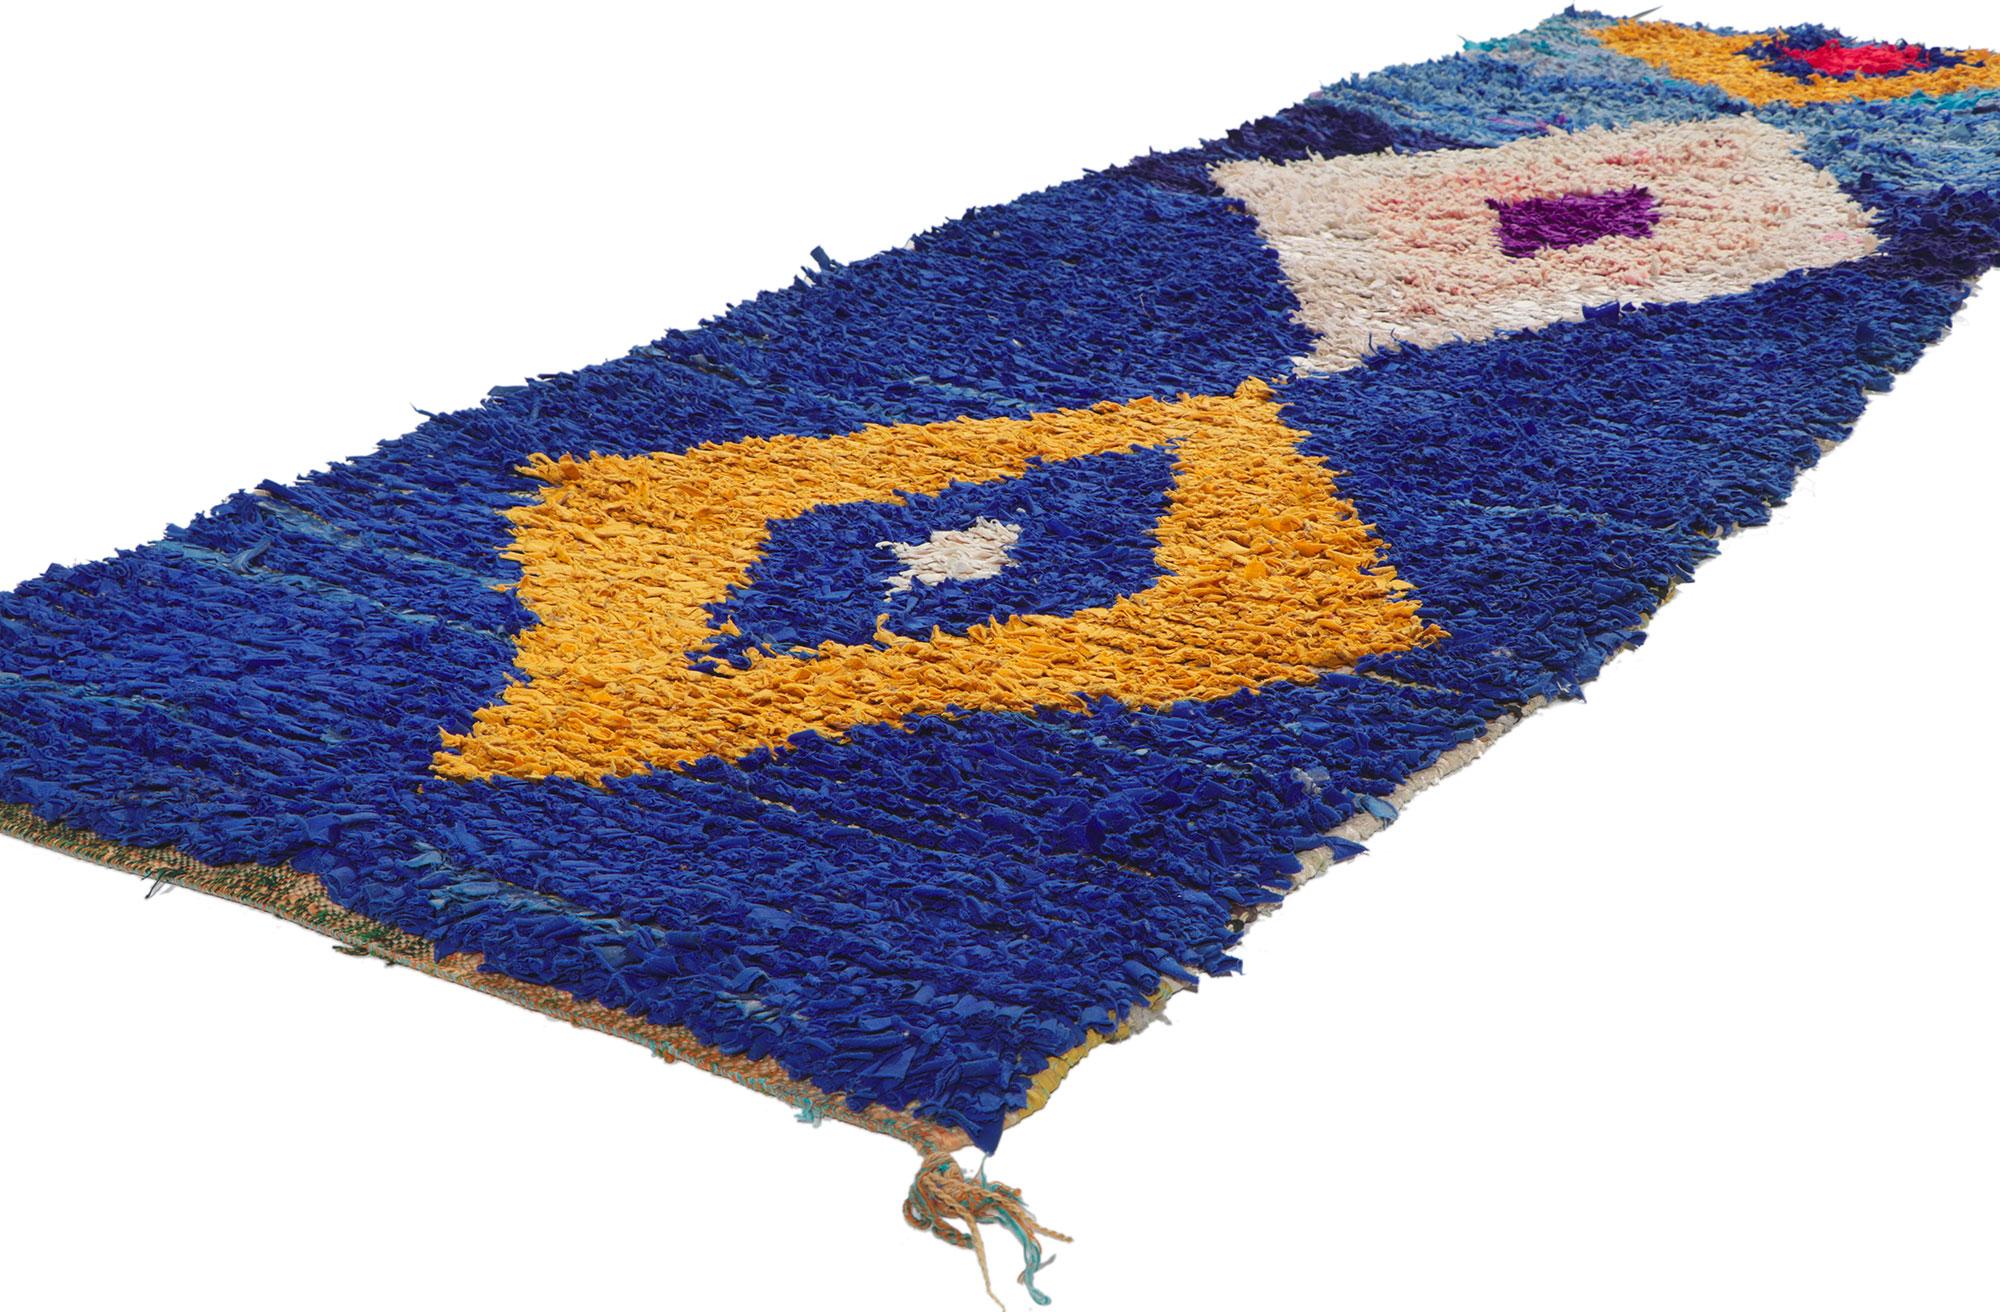 ?78392 Vintage Moroccan Rag rug 02'11 x 09'00. With its nomadic charm, incredible detail and texture, this hand knotted vintage Moroccan rag rug is a captivating vision of woven beauty. The eye-catching diamond pattern and lively colorway woven into